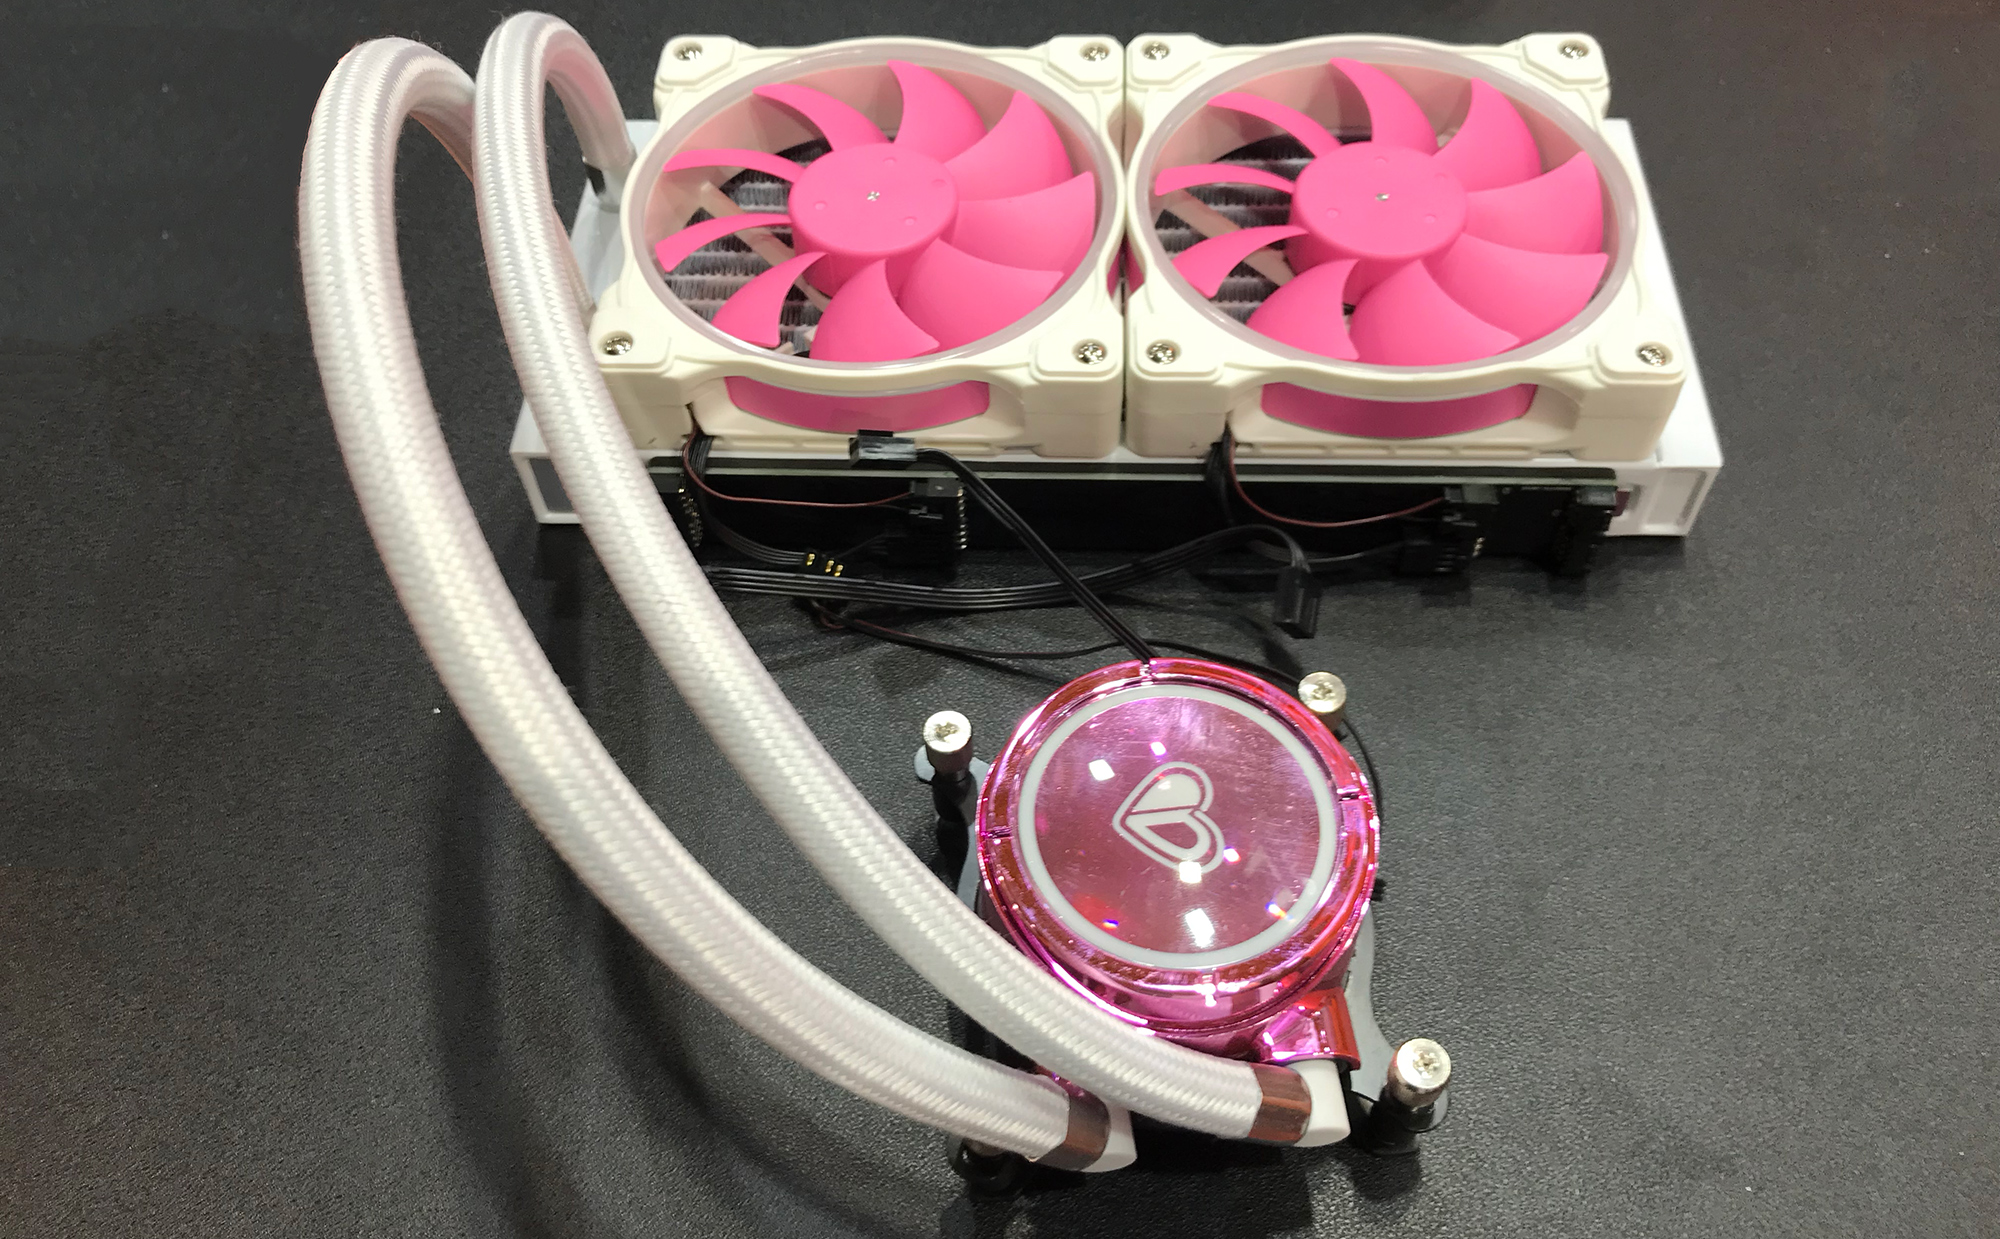 Spotted at Computex: A and Pink AIO LCS from ID Cooling